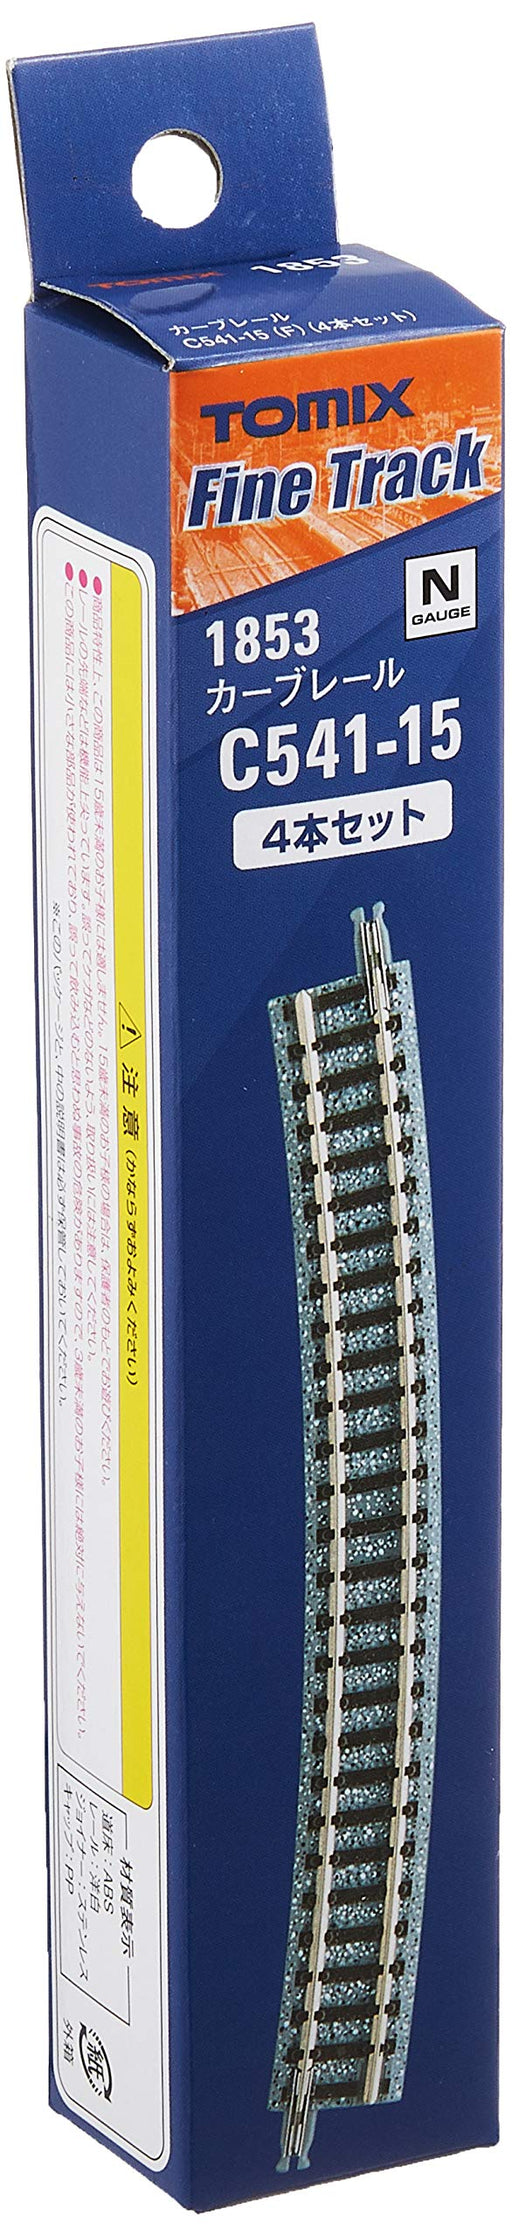 Tomix N gauge 018537 Curve Track C541-15 F 4 pieces Model Railroad Supplies NEW_2